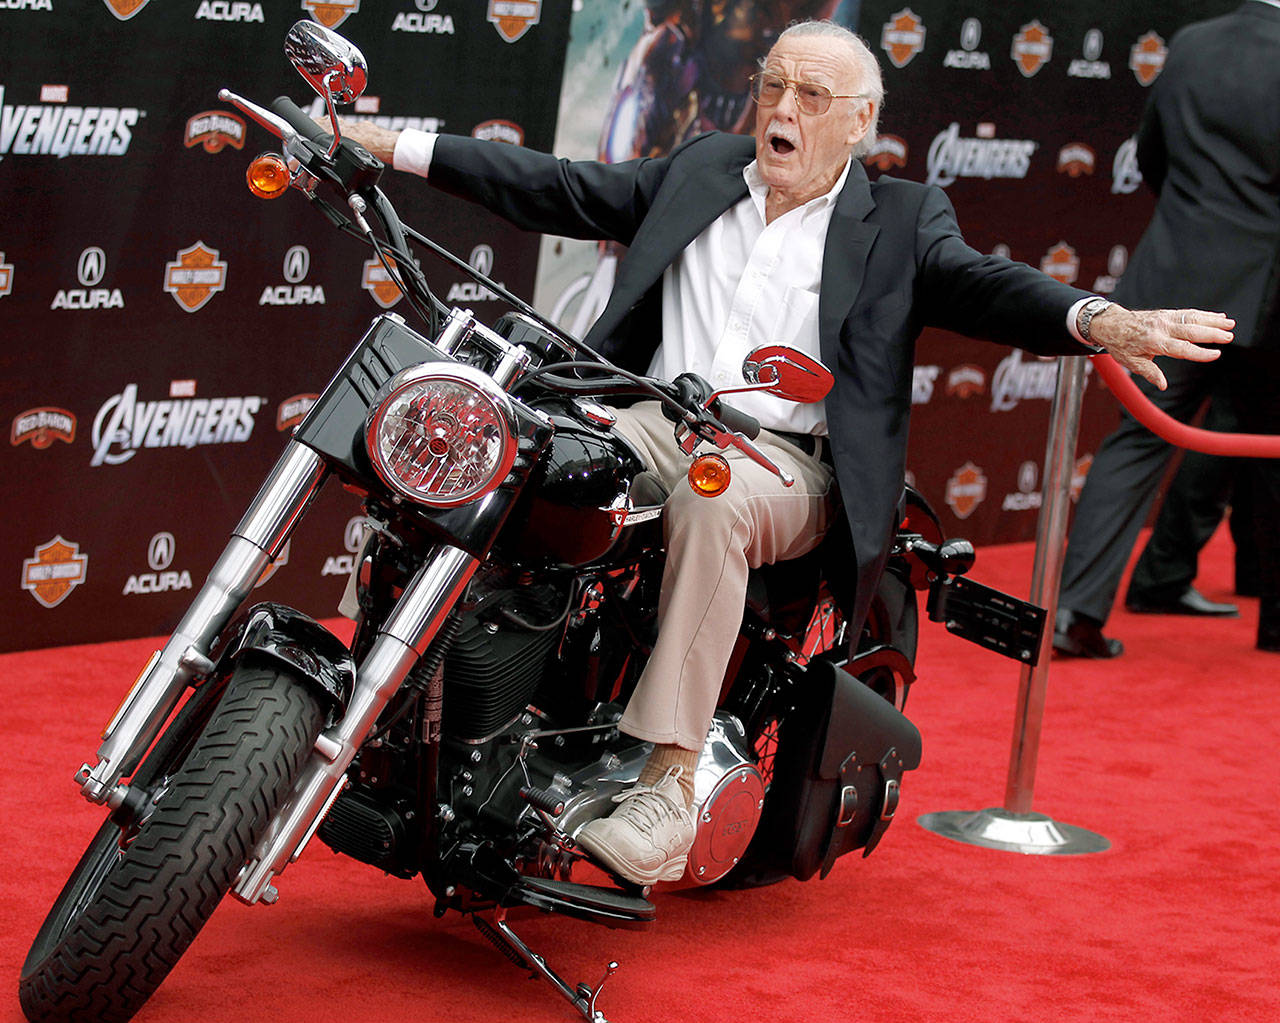 Stan Lee at the premiere of “The Avengers” in Los Angeles in 2012. (AP Photo/Matt Sayles, File)